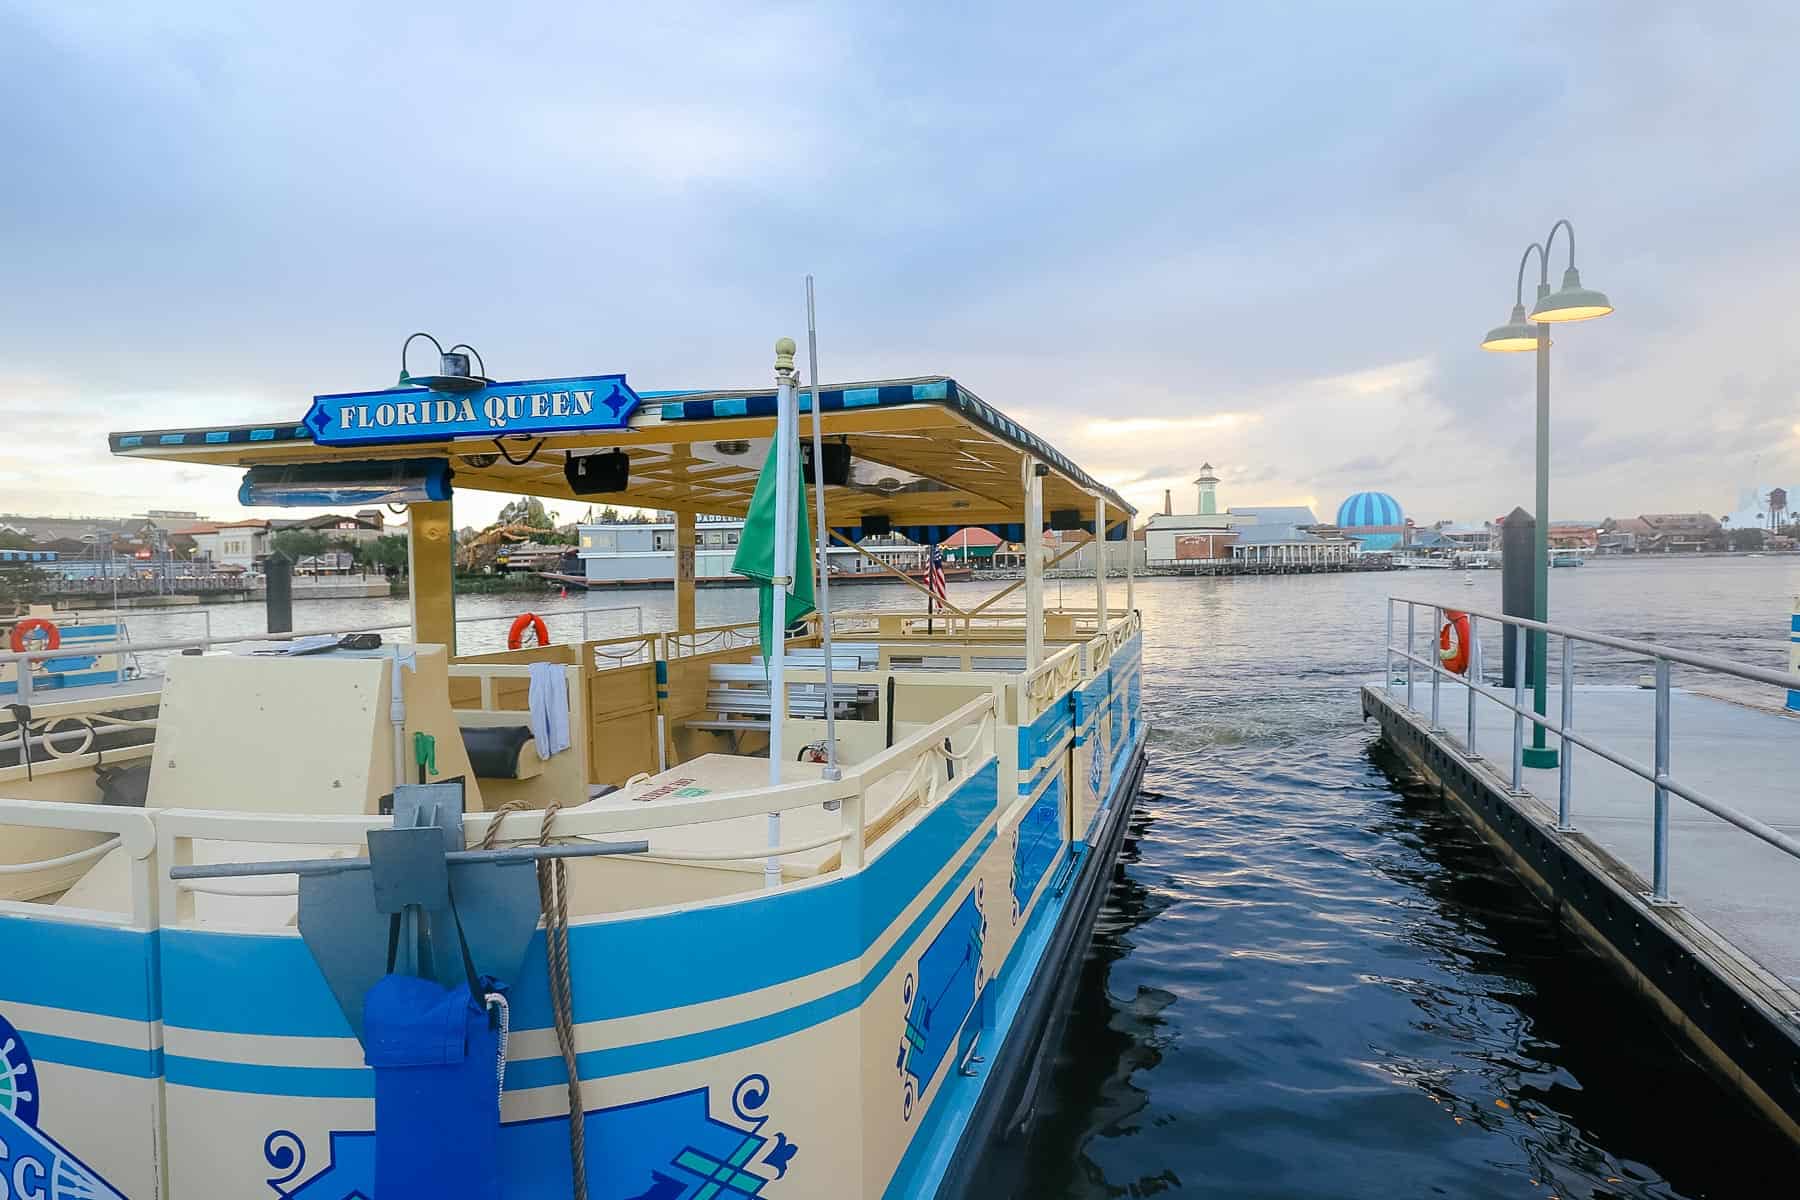 Two moderate resorts have boat transportation to Disney Springs. 